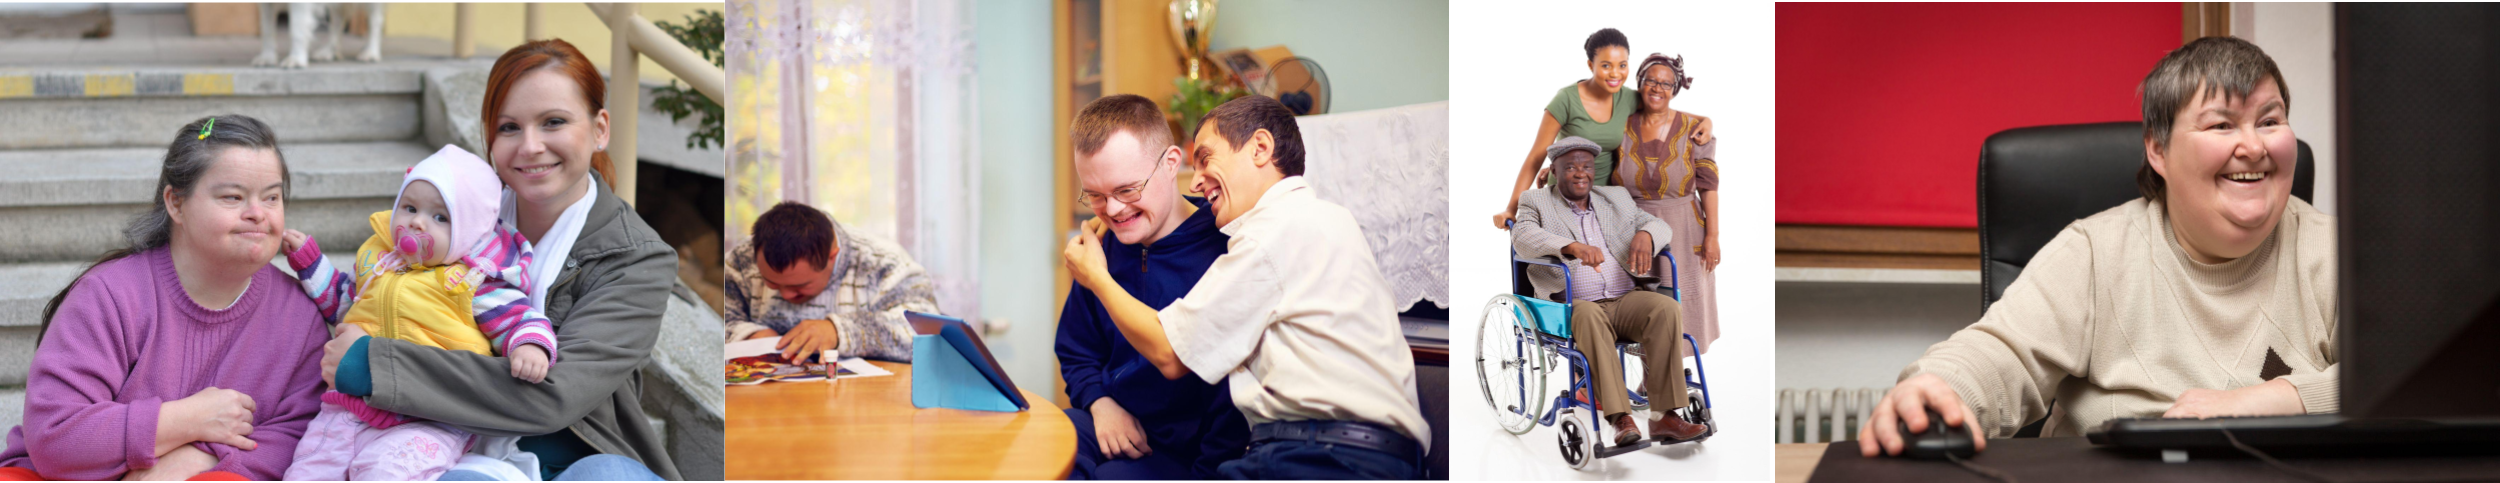 Cover image showing images of disabled individuals